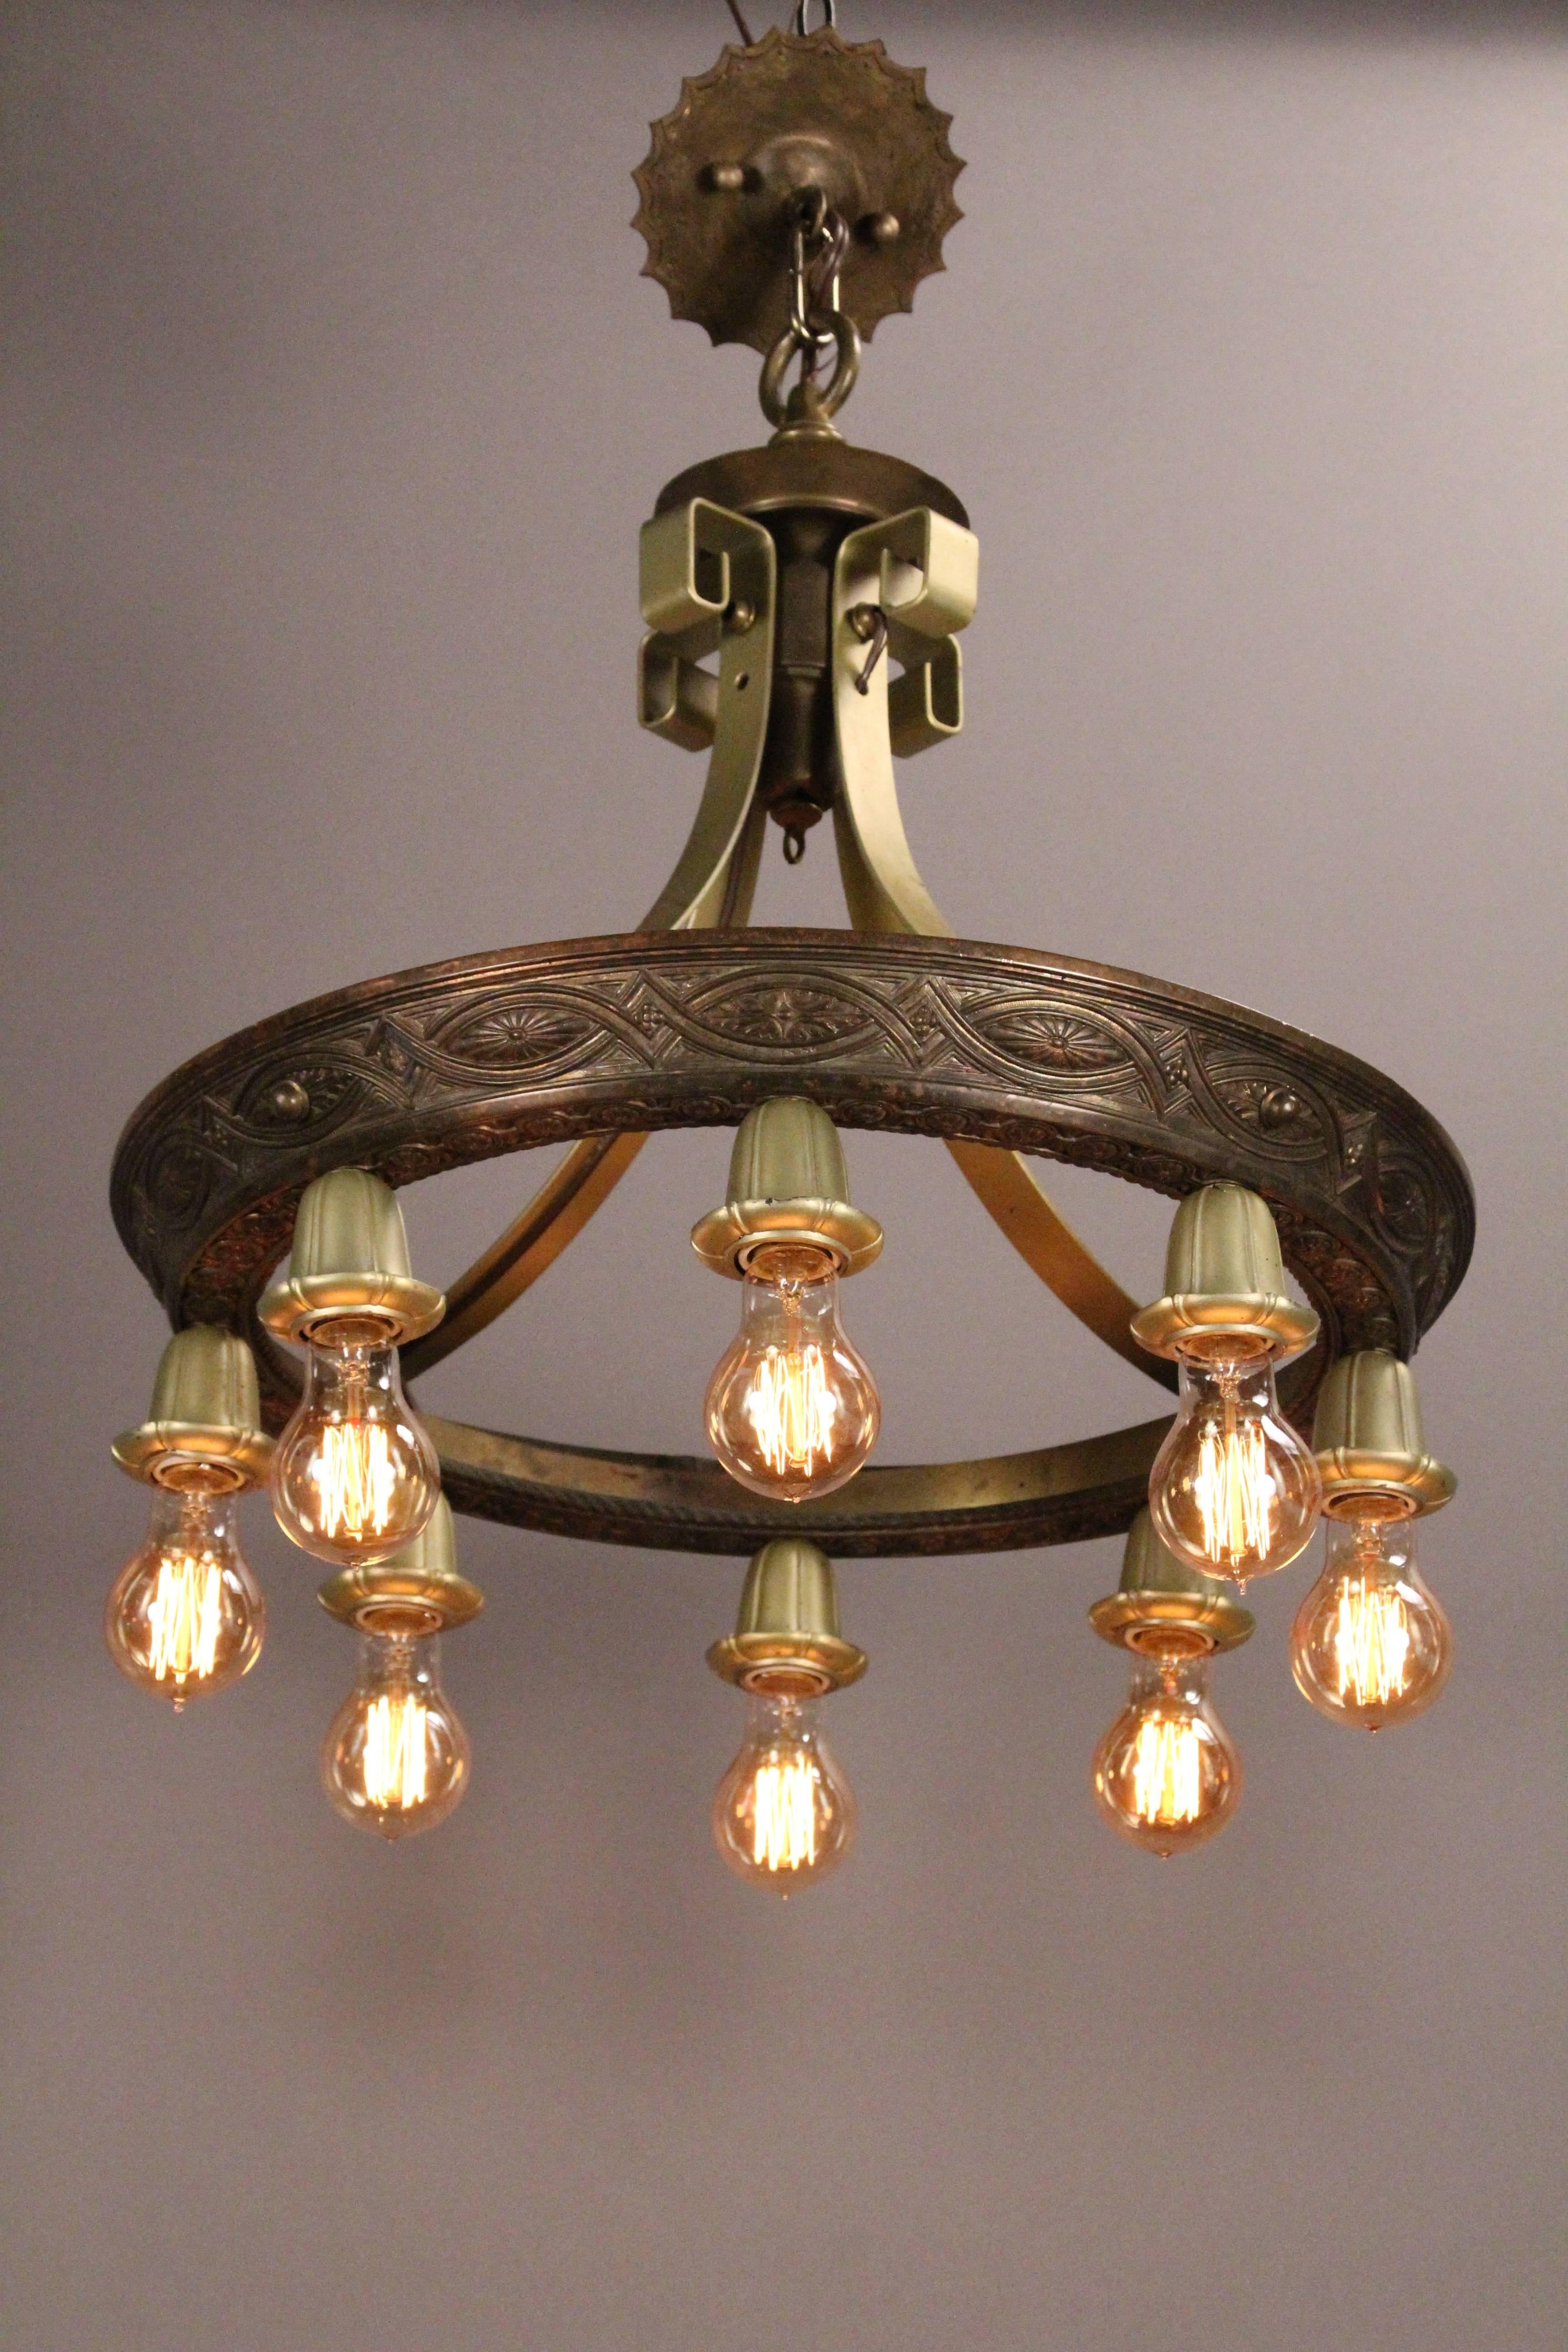 Sold and priced individually, circa 1920s chandelier with eight light would fit nicely in Spanish Revival or English Tudor. Measures: 22.5